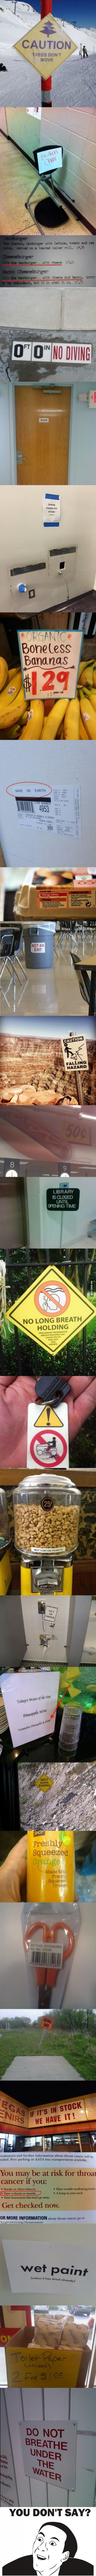 20 Obvious Signs Are Obvious